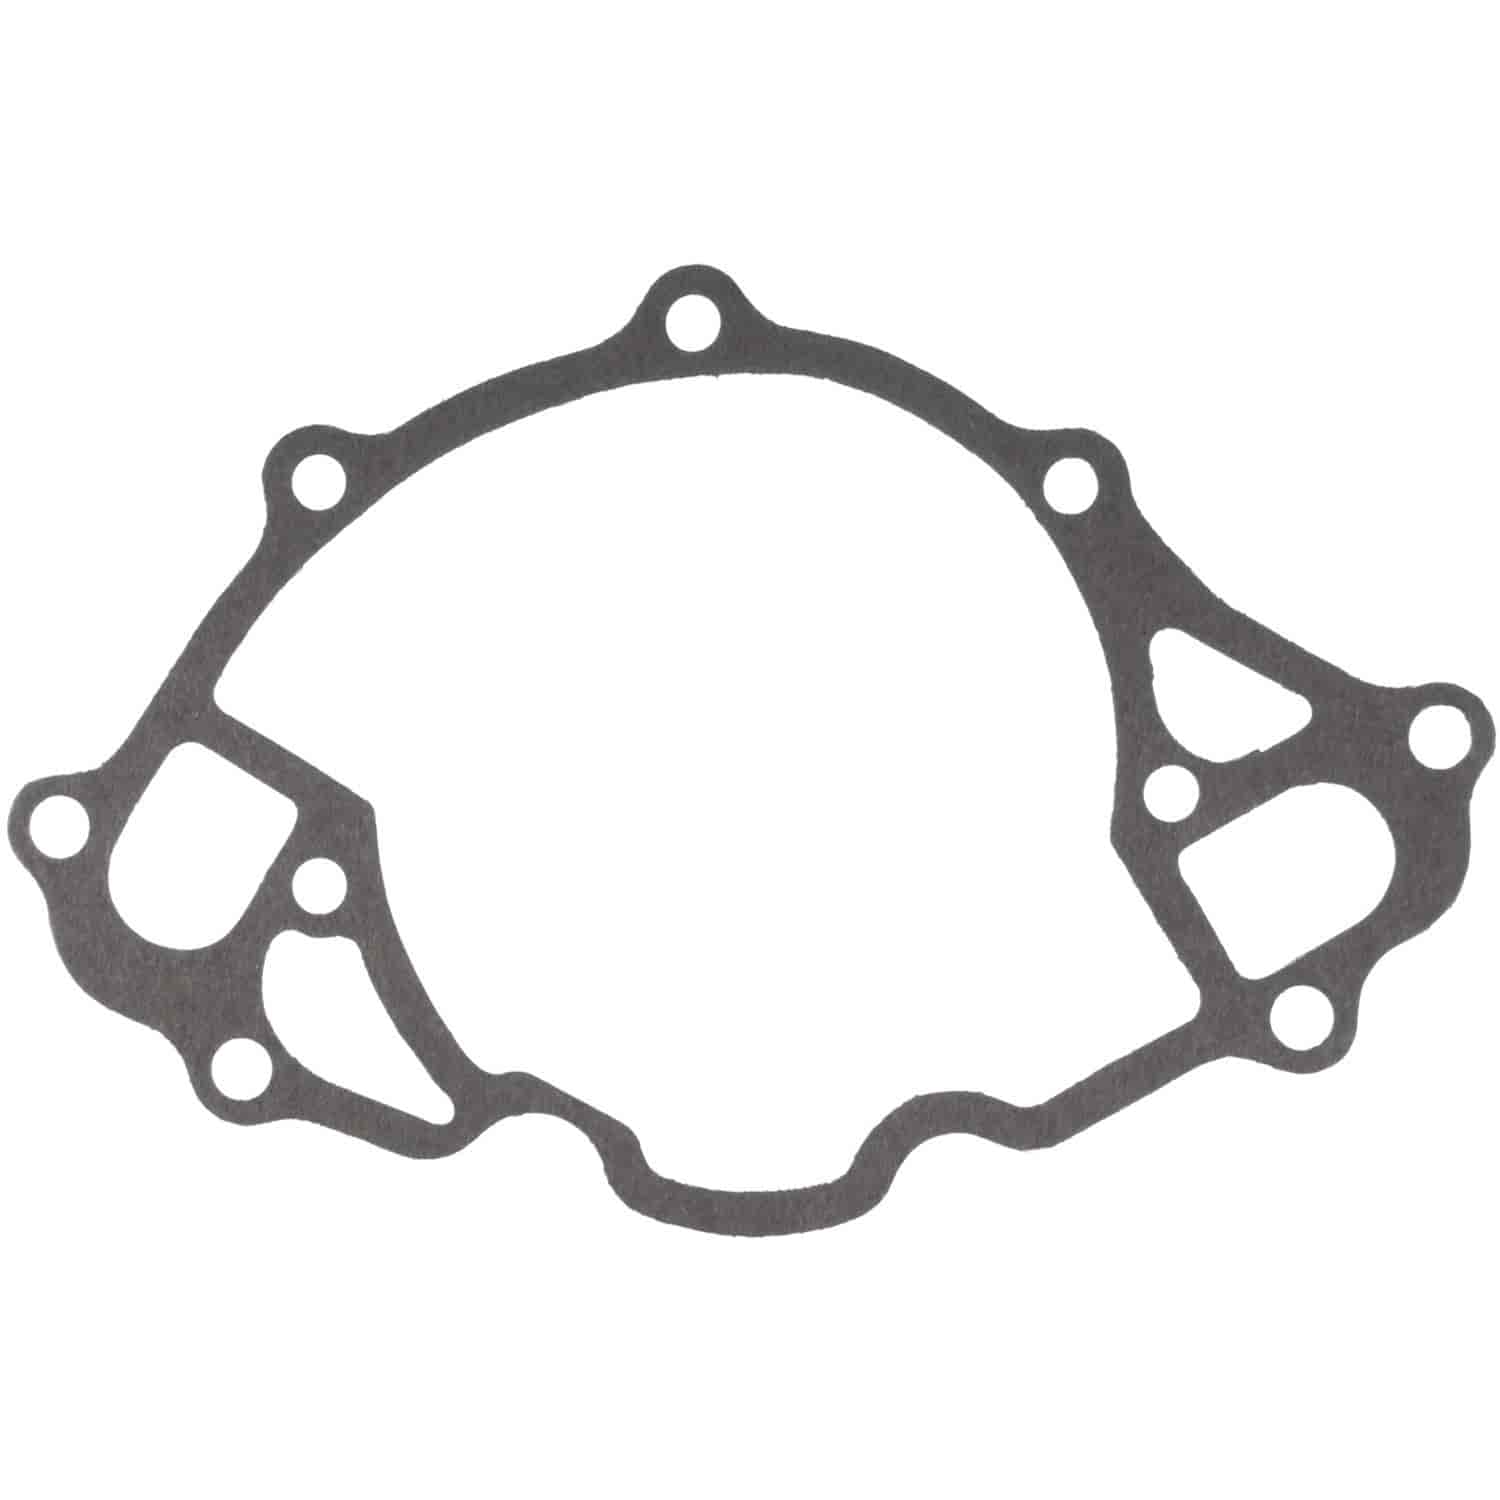 Water Pump Gasket 1963-1992 Small Block Ford 255/289/302/351W